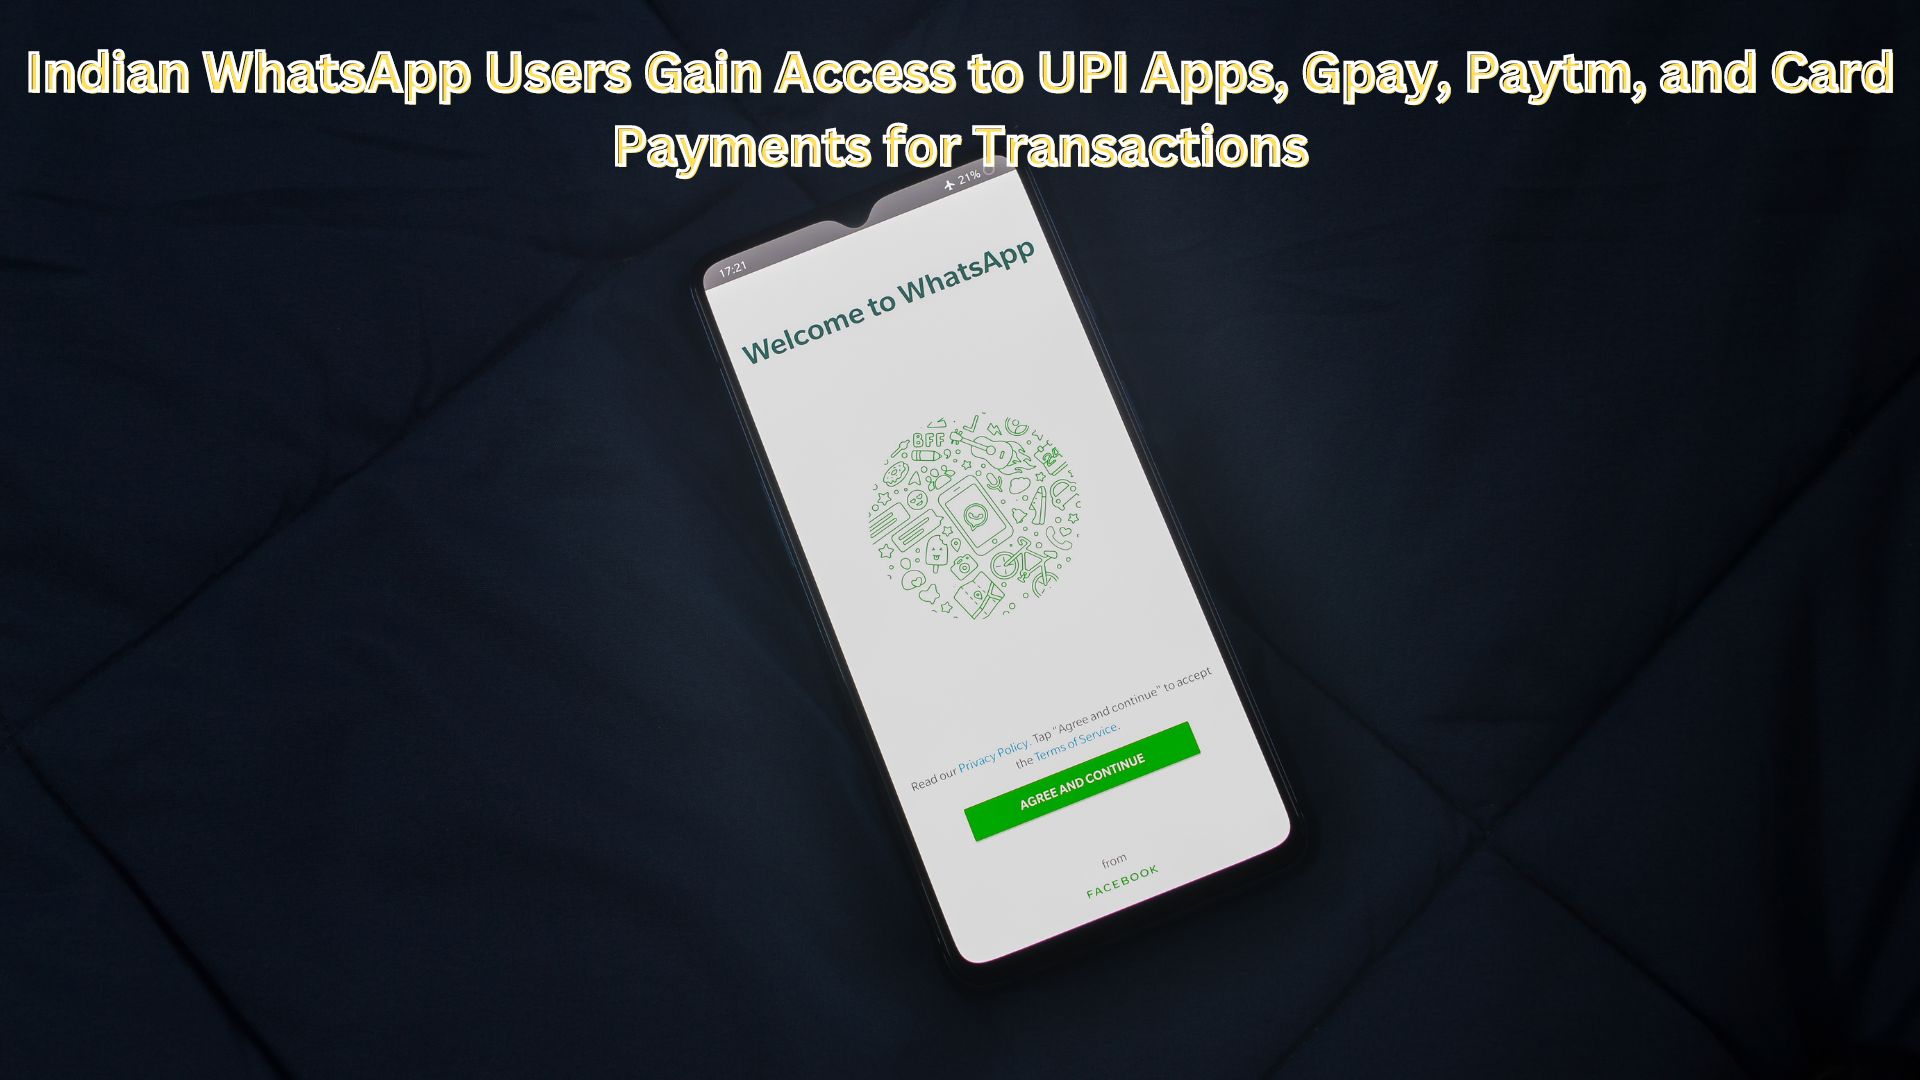 Indian WhatsApp Users Gain Access to UPI Apps, Gpay, Paytm, and Card Payments for Transactions